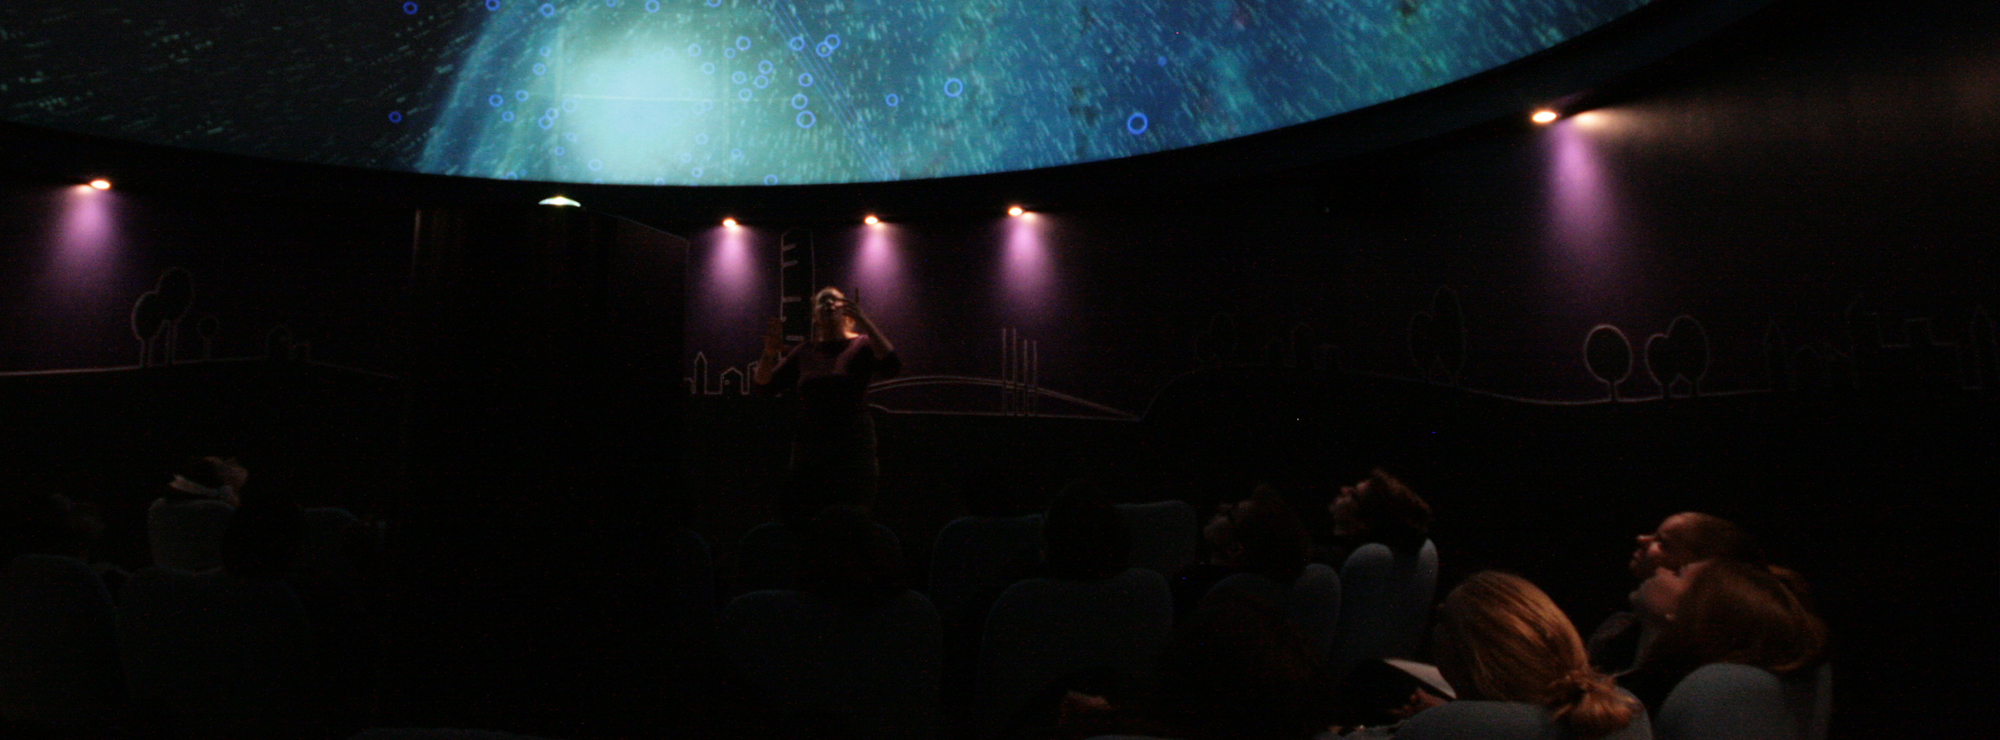 The astronomers guides our visitors on a journey to the planets, stars and galaxies.